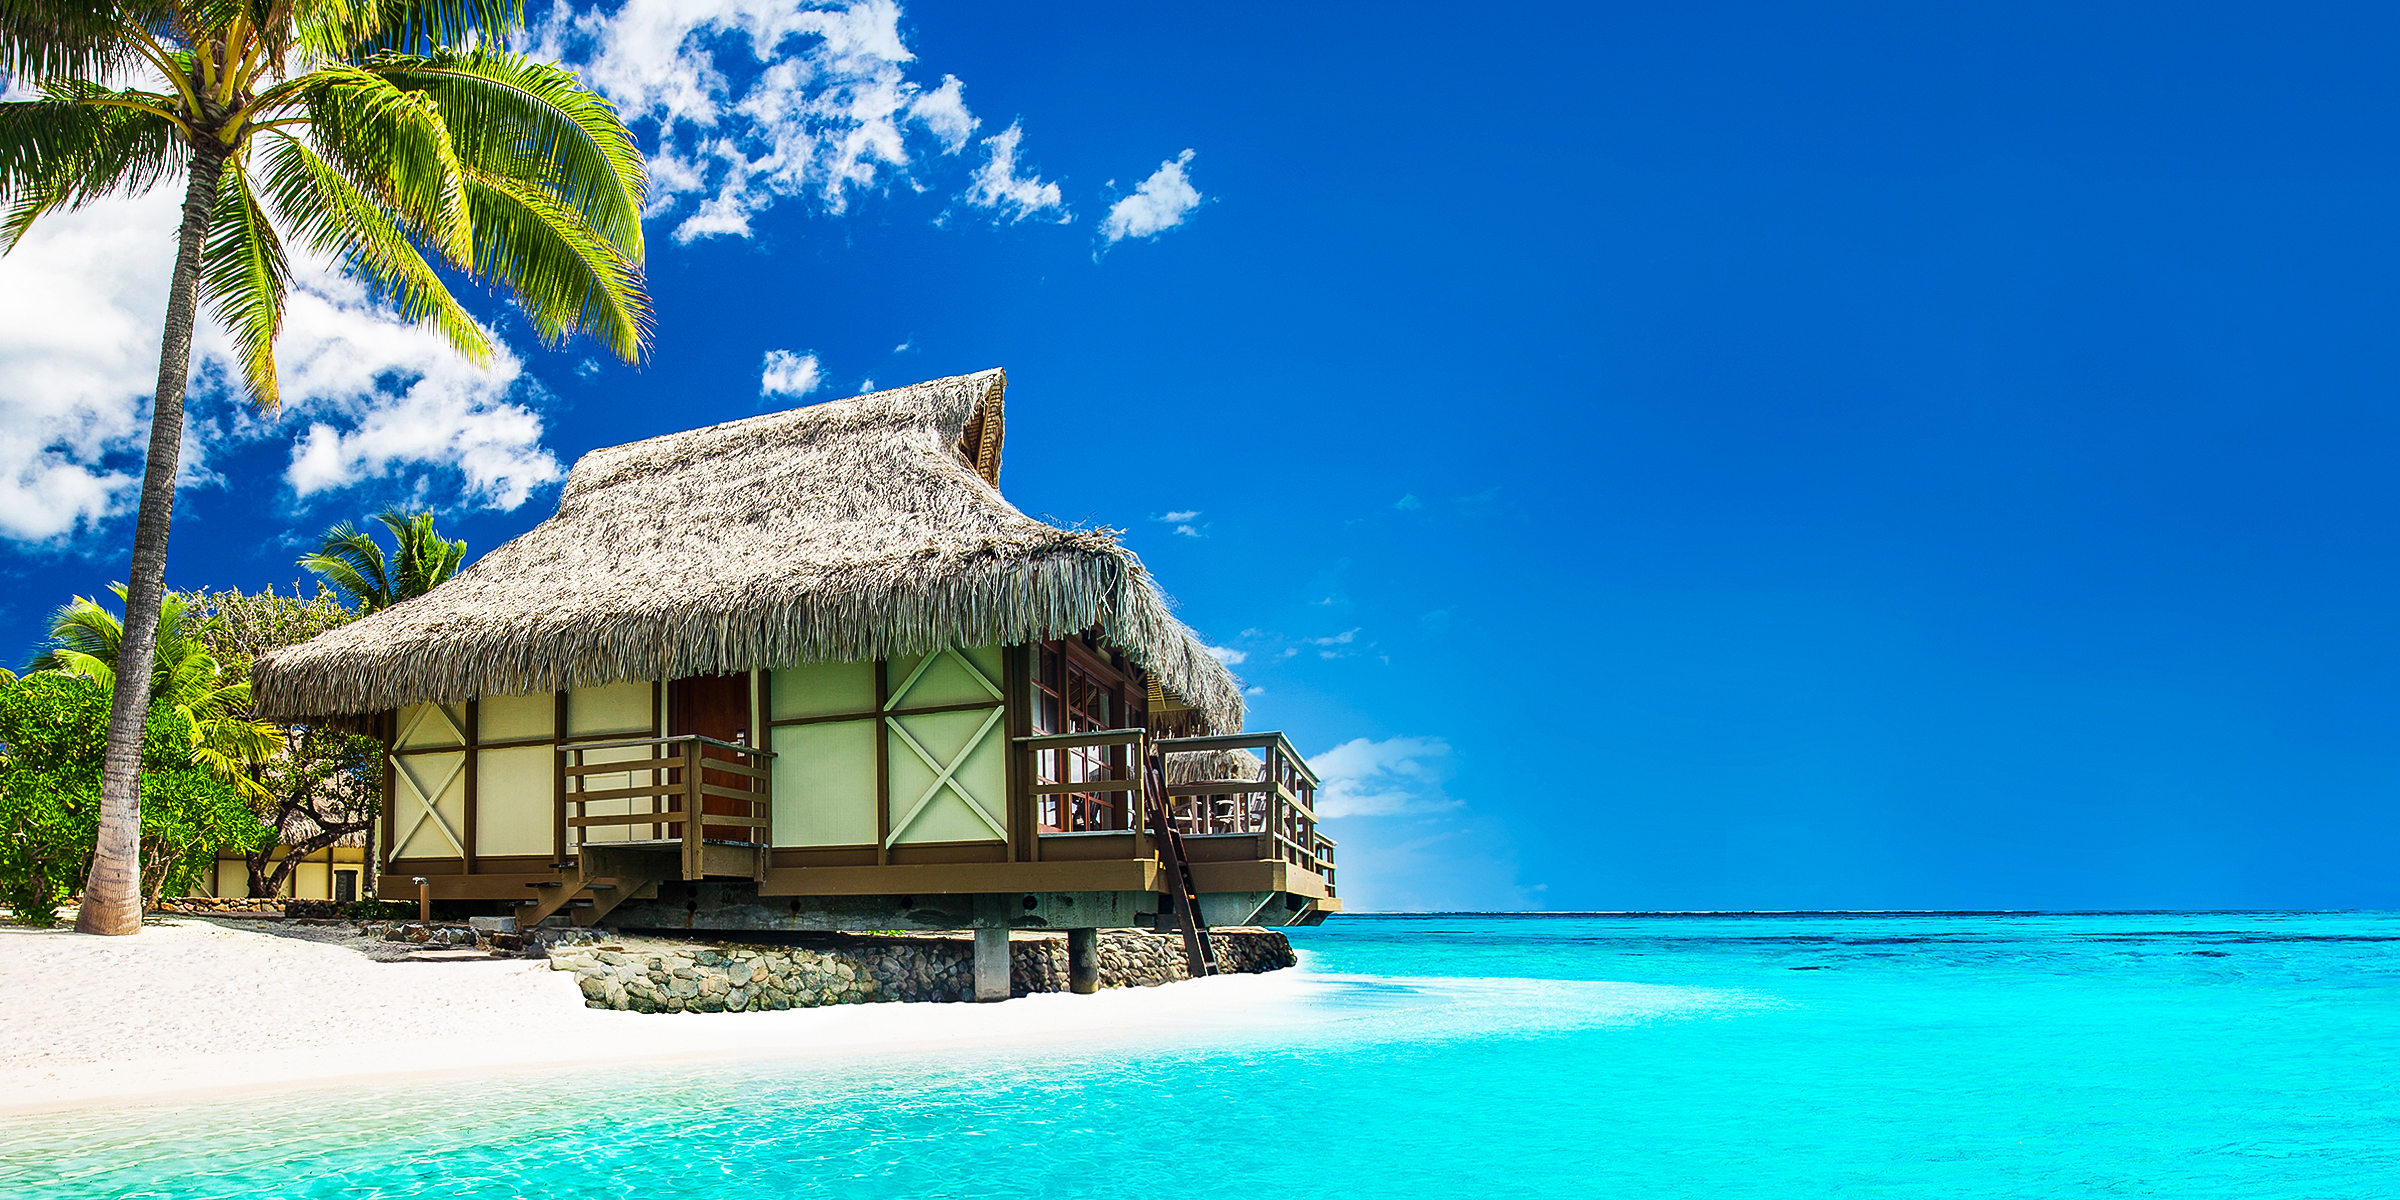 A house by the beach | Source: Shutterstock